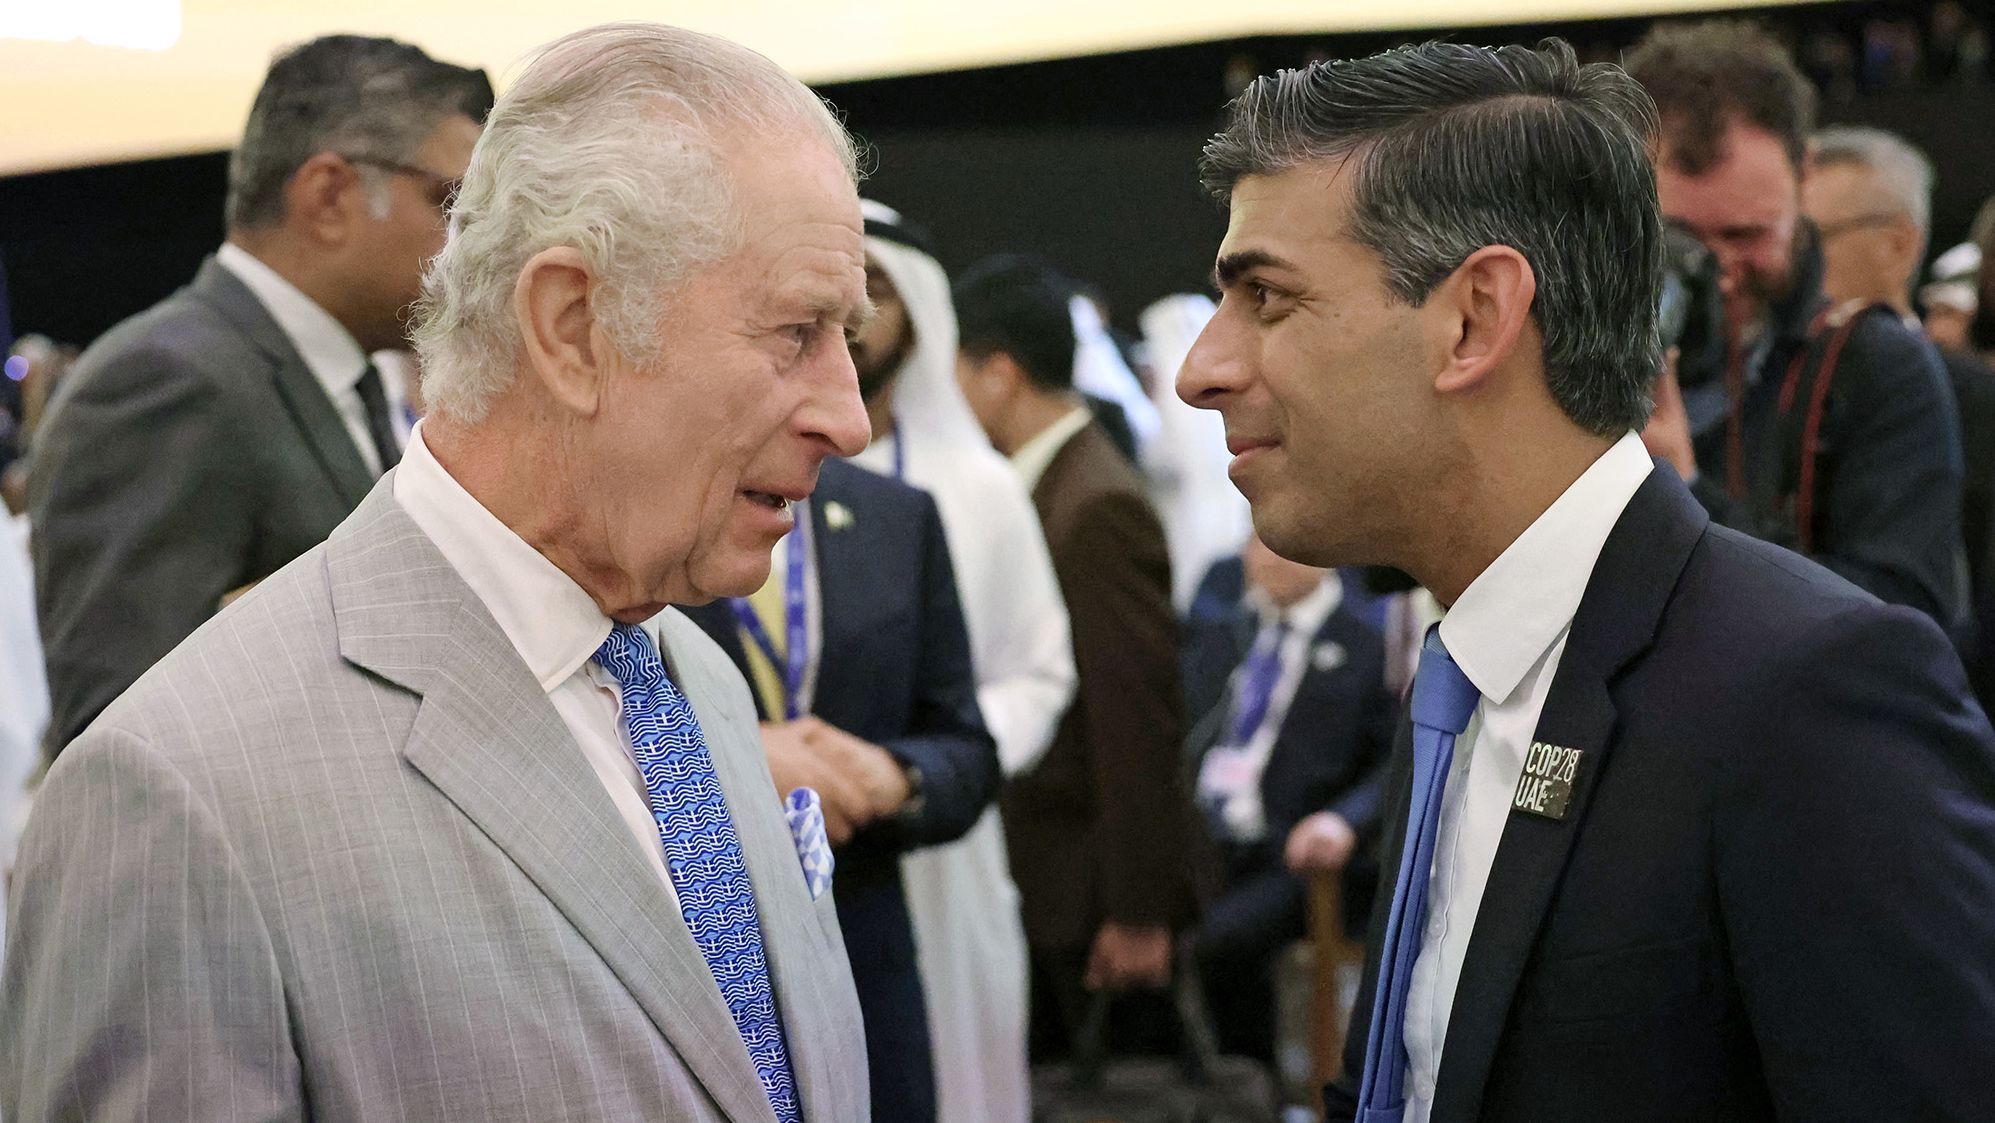 DUBAI, UNITED ARAB EMIRATES - DECEMBER 01: King Charles III and Prime Minister of the United Kingdom Rishi Sunak attend the opening ceremony of the World Climate Action Summit during COP28 on December 01, 2023 in Dubai, United Arab Emirates. The King is visiting Dubai to attend COP28 UAE, the United Nation's Climate Change Conference.  (Photo by Chris Jackson/Getty Images)